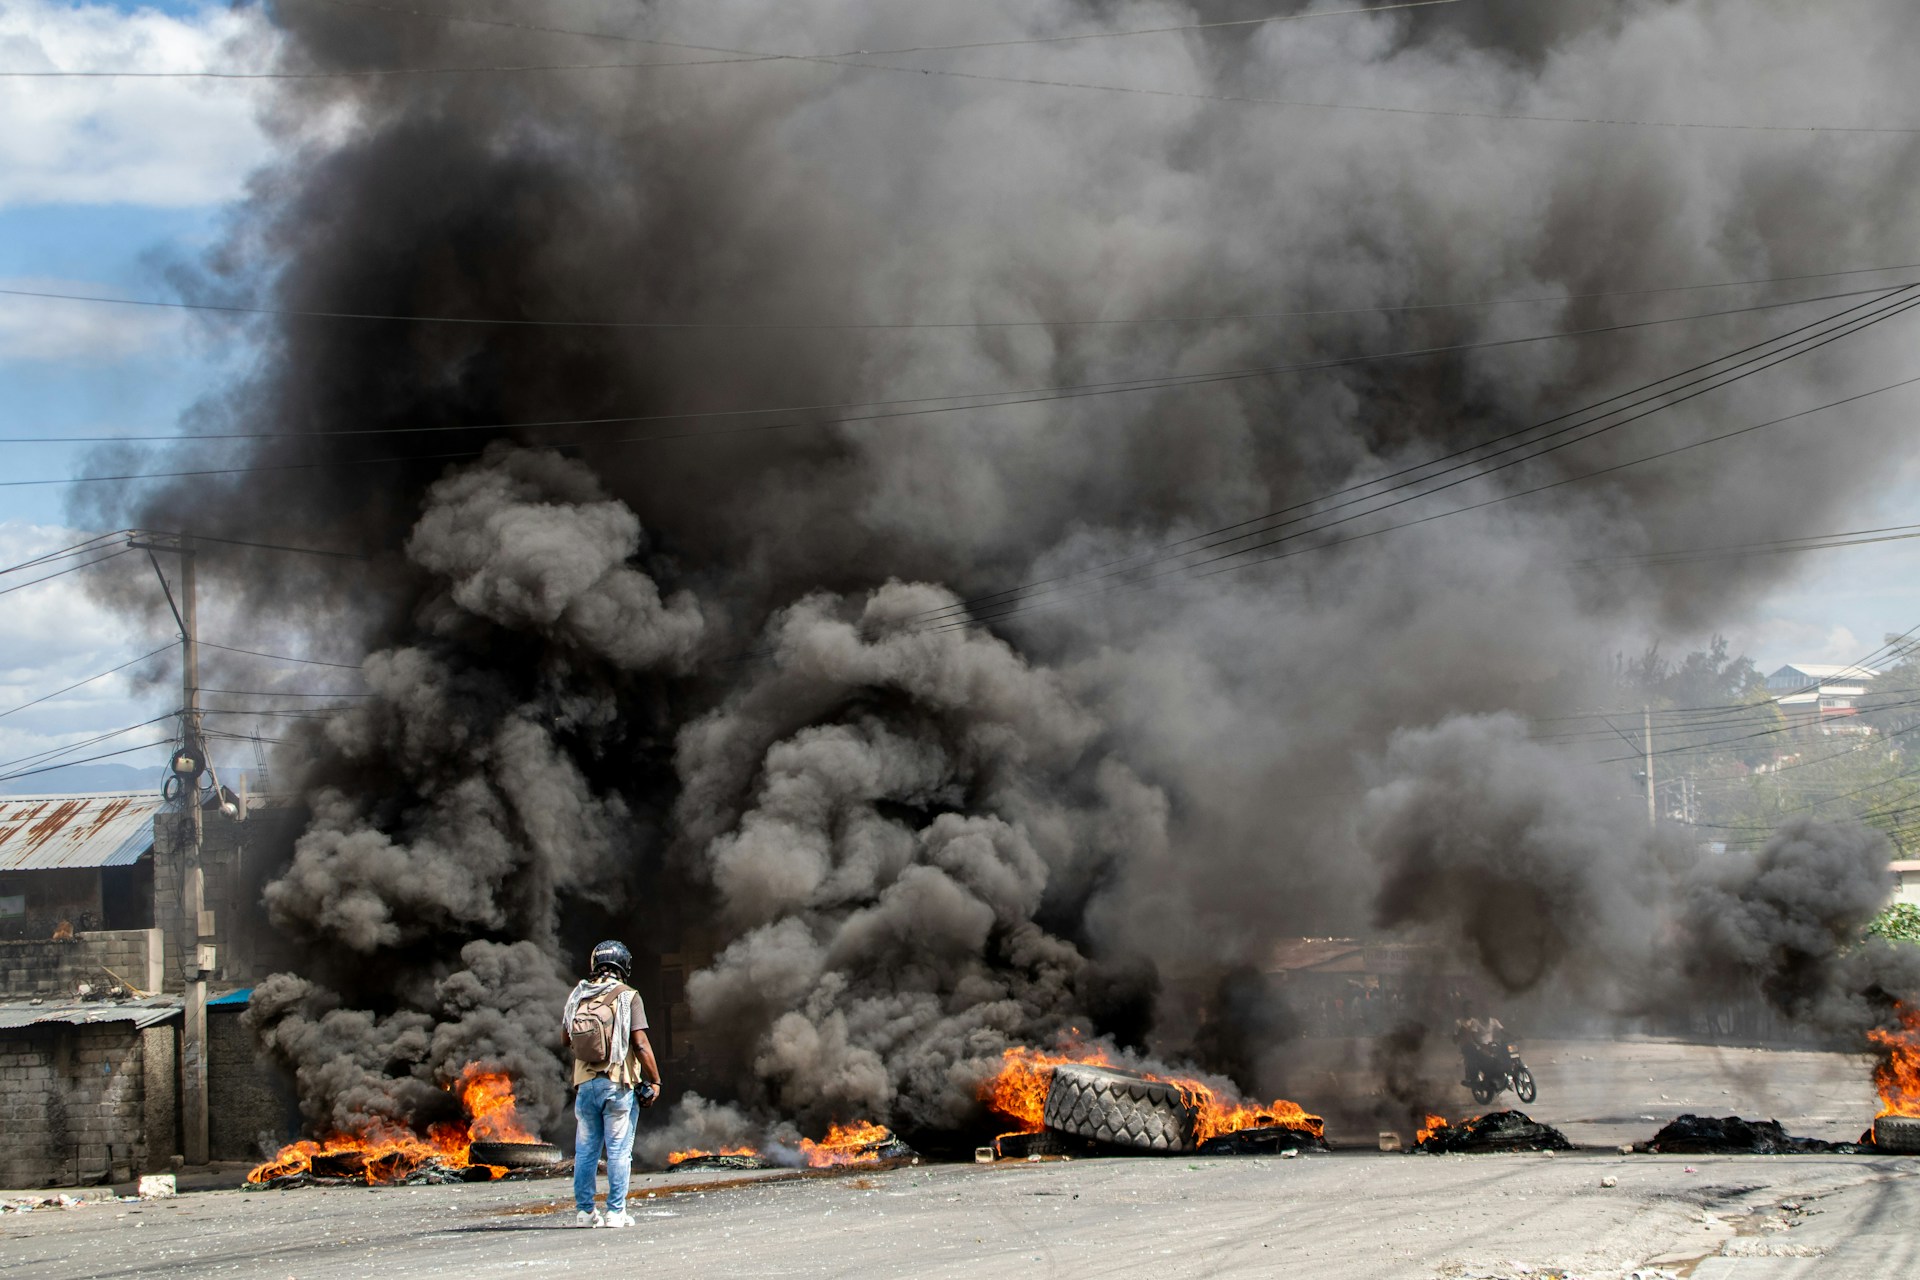 Lone human in jeans and tactical non-military gears stands with back to photographer. They are wearing a helmet. The person is looking at dark smoke burning from tire and other fires.